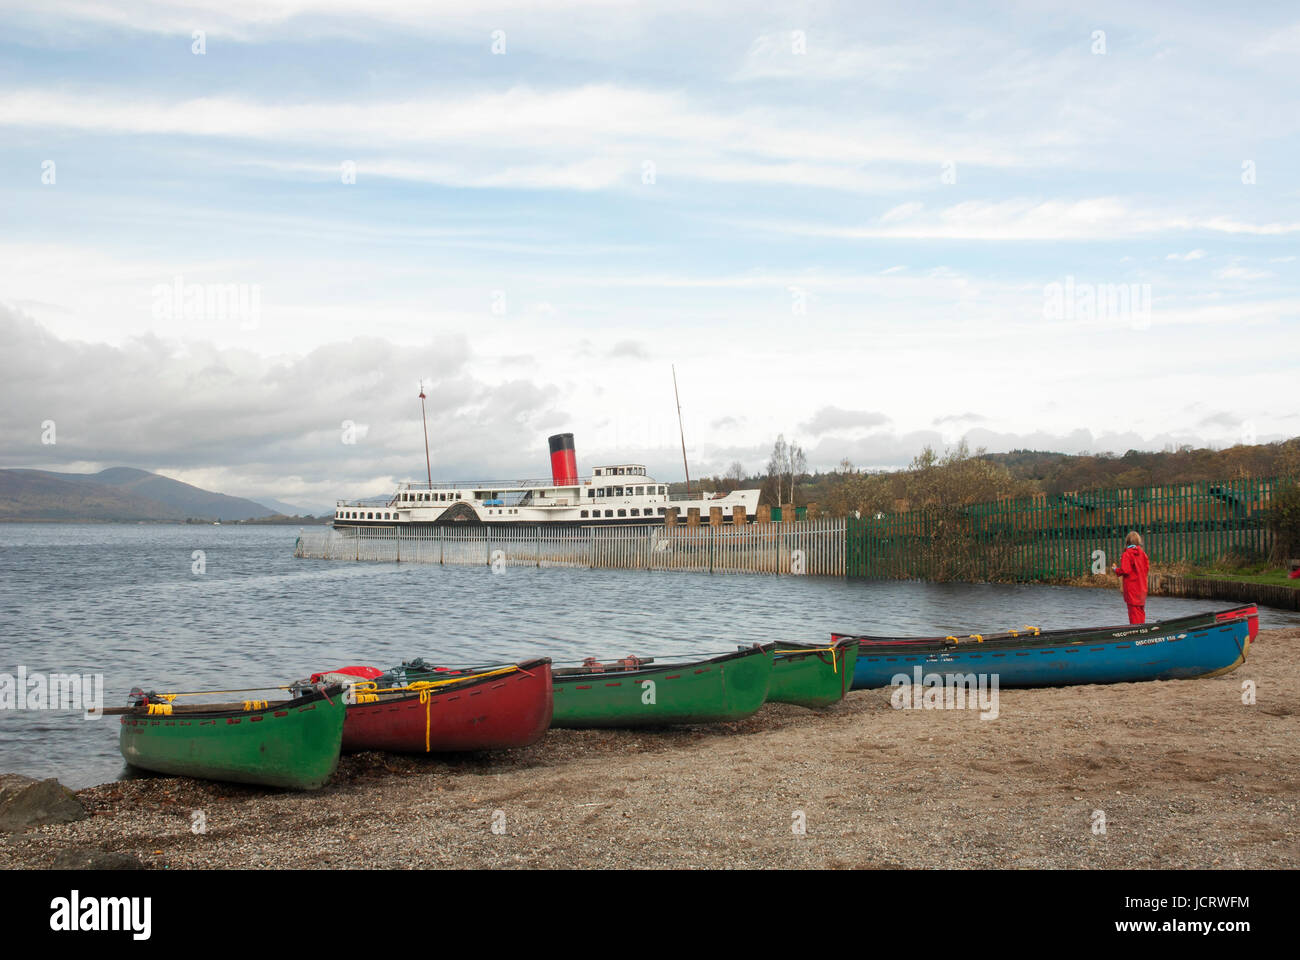 Maid of the Loch paddle steamer moored at Balloch Pier on Loch Lomond. Scotland.  Kayaks in foreground. Stock Photo